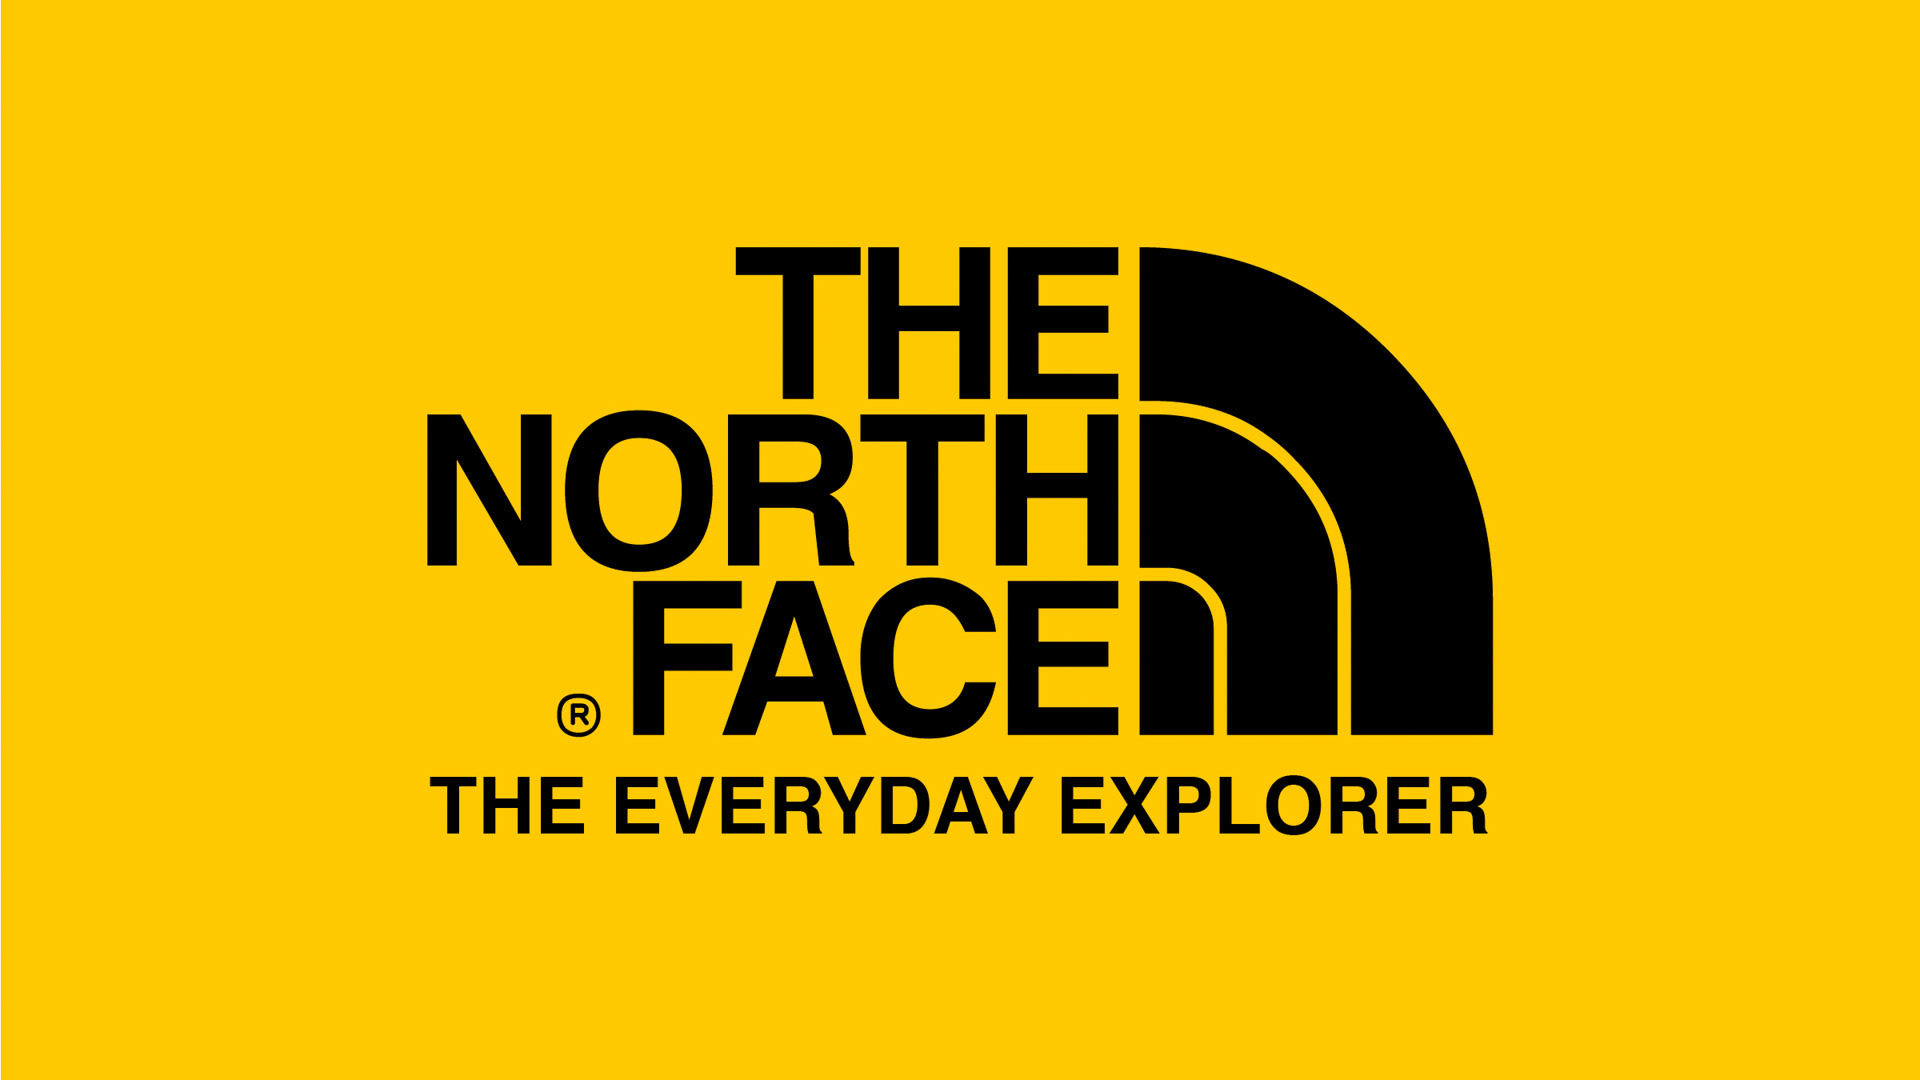 The North Face | The Everyday Explorer | The One Club